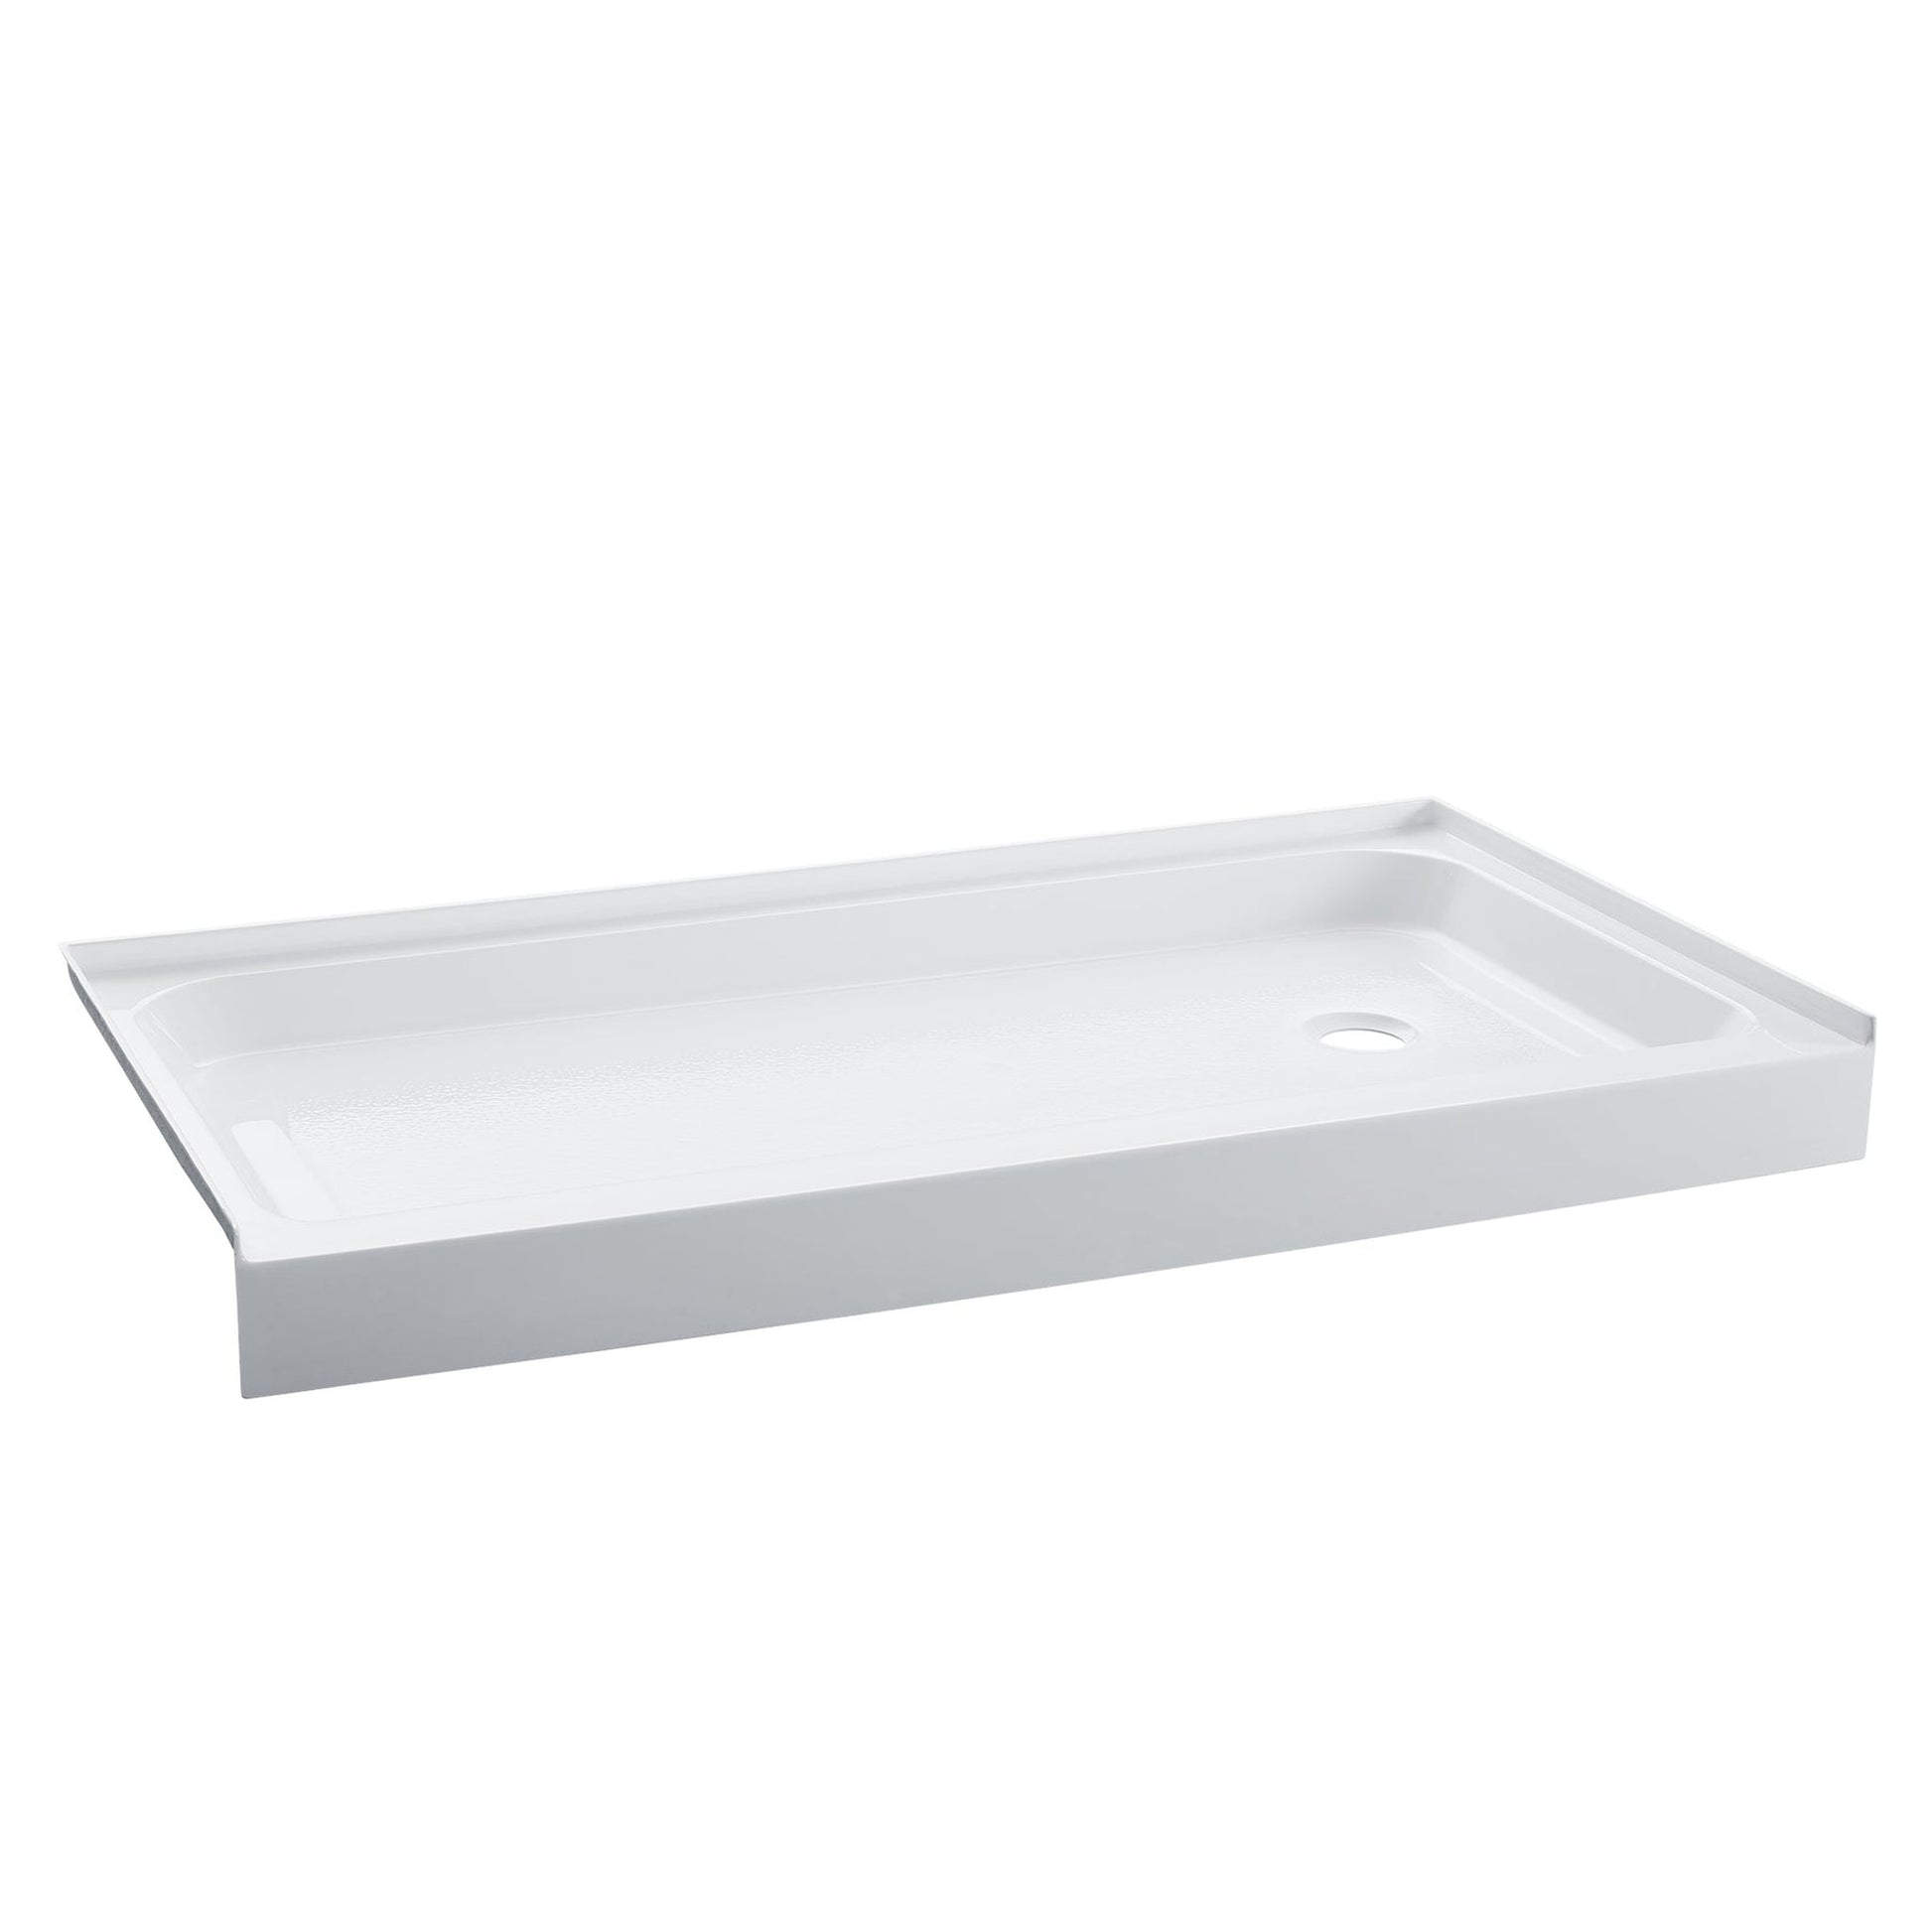 Swiss Madison Voltaire 60" x 36" Three-Wall Alcove White Right-Hand Drain Shower Base With Built-In Integral Flange